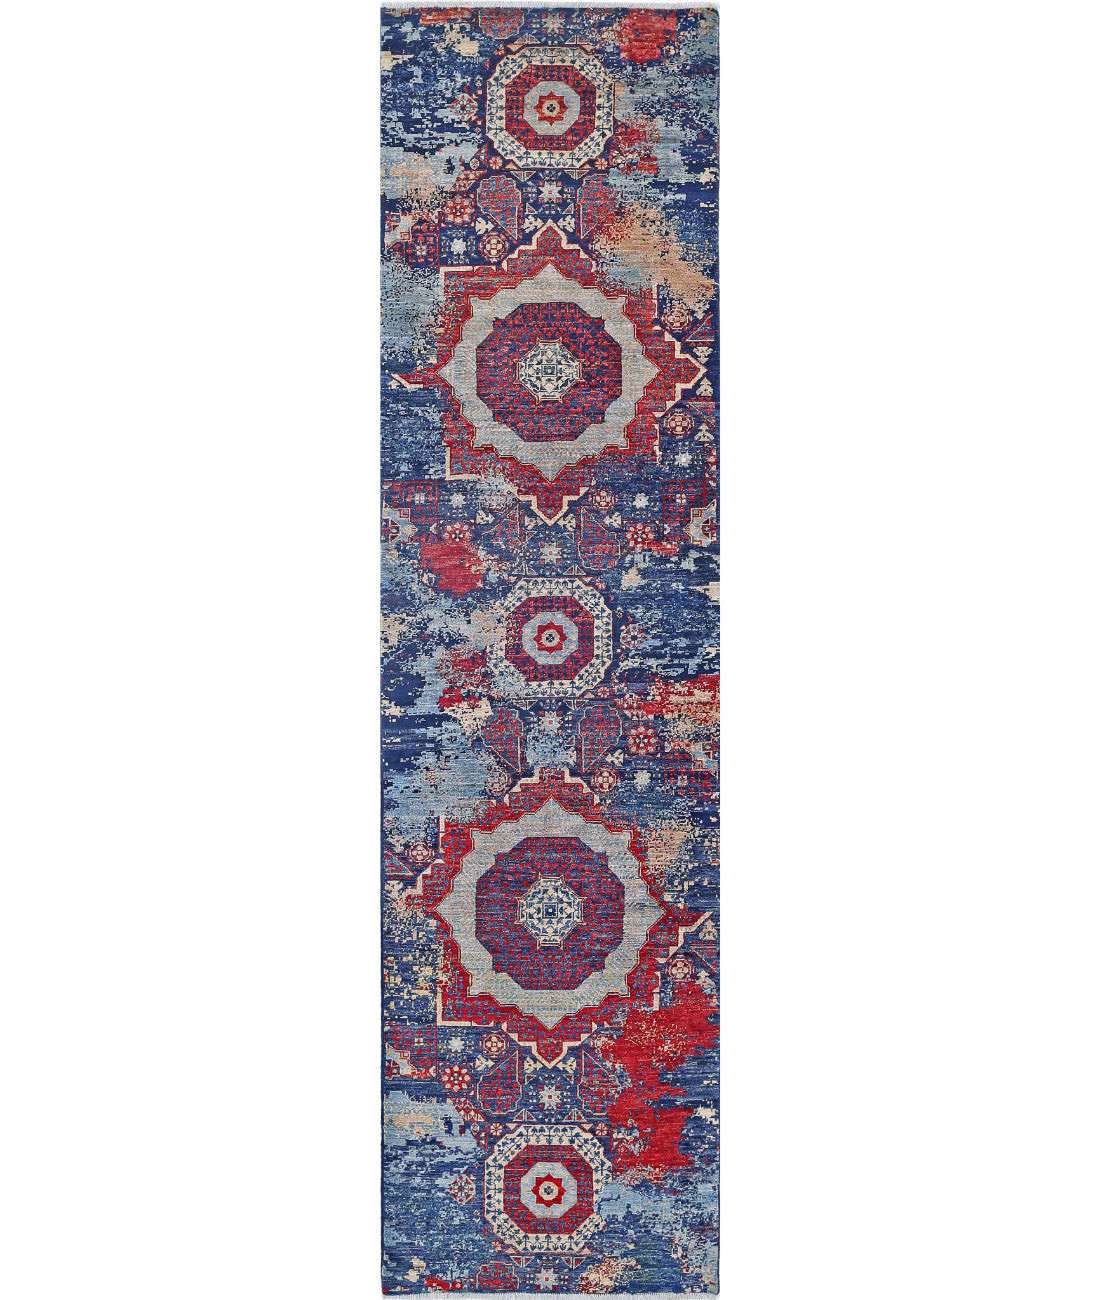 Hand Knotted Mamluk Wool Rug - 2'6'' x 9'7'' 2'6'' x 9'7'' (75 X 288) / Blue / Red